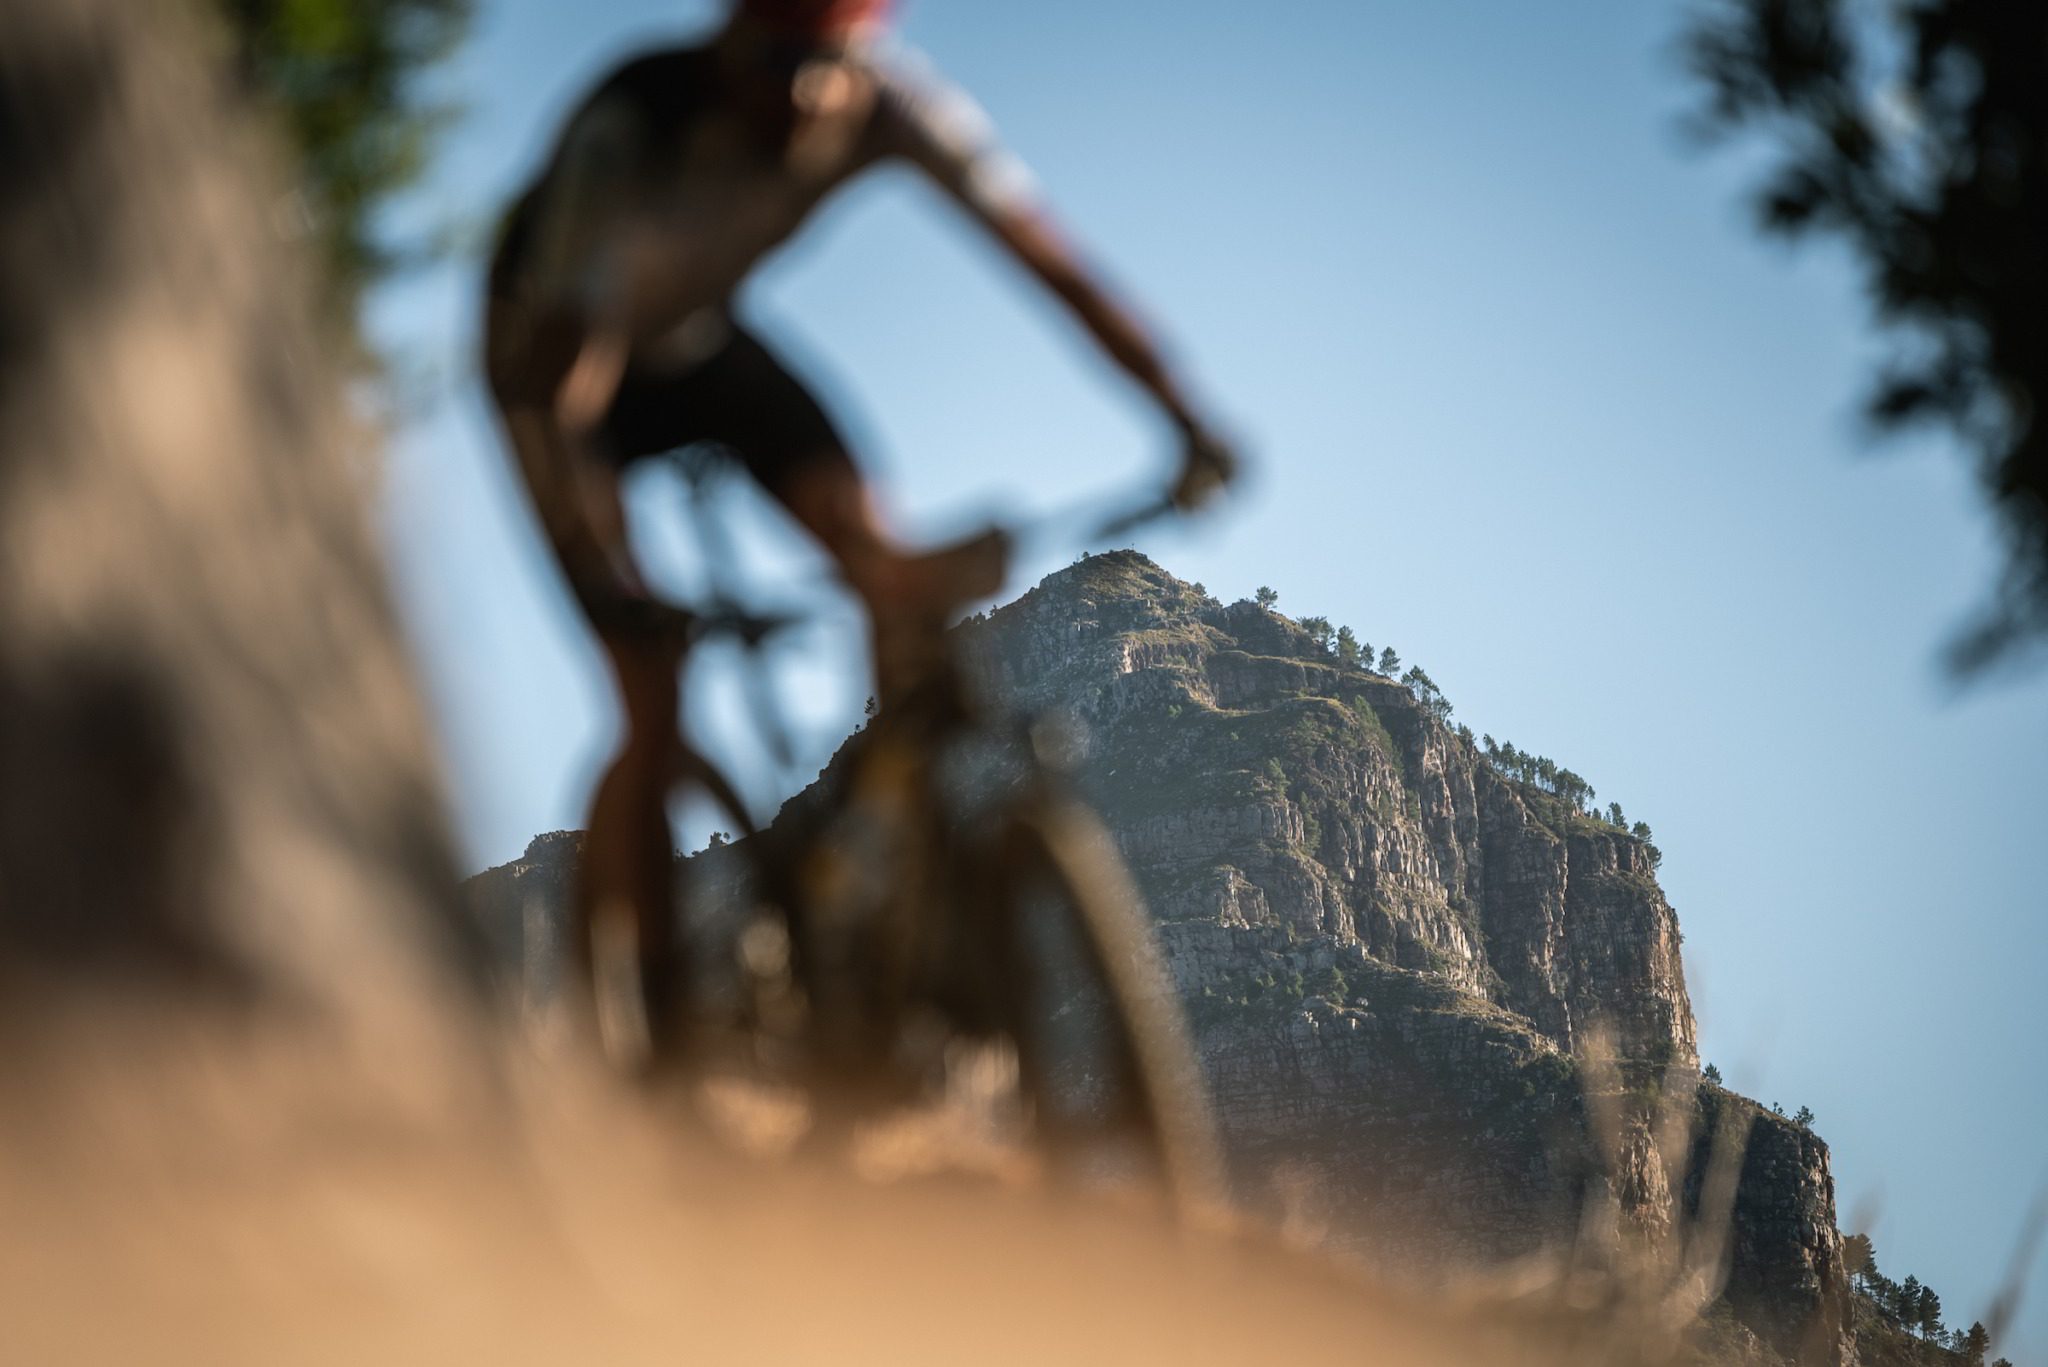 Photo by Justin Coomber/Cape Epic